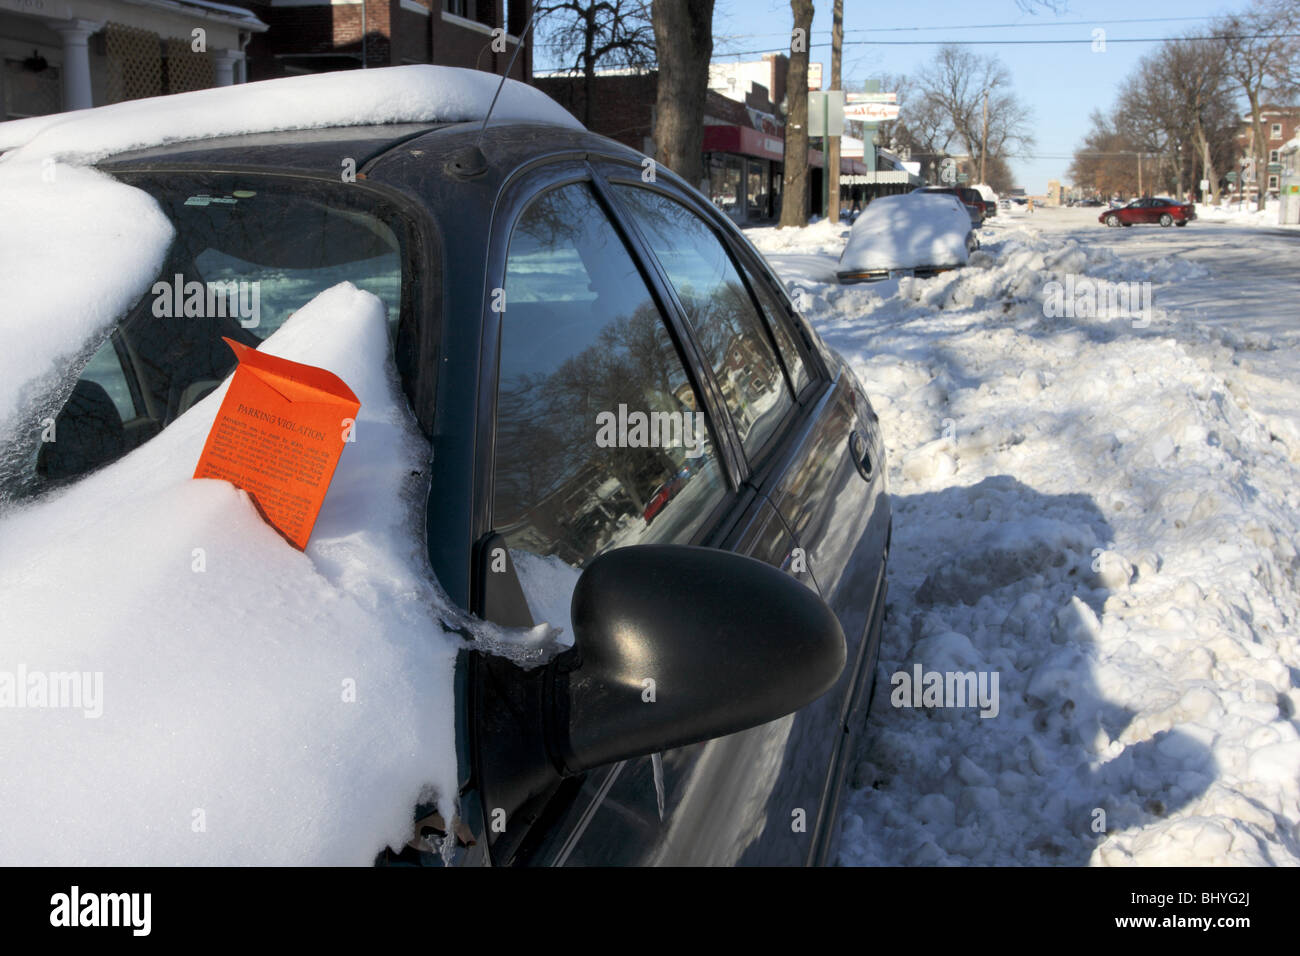 Parking ticket embedded in snow on car windshield on snowy street. Stock Photo